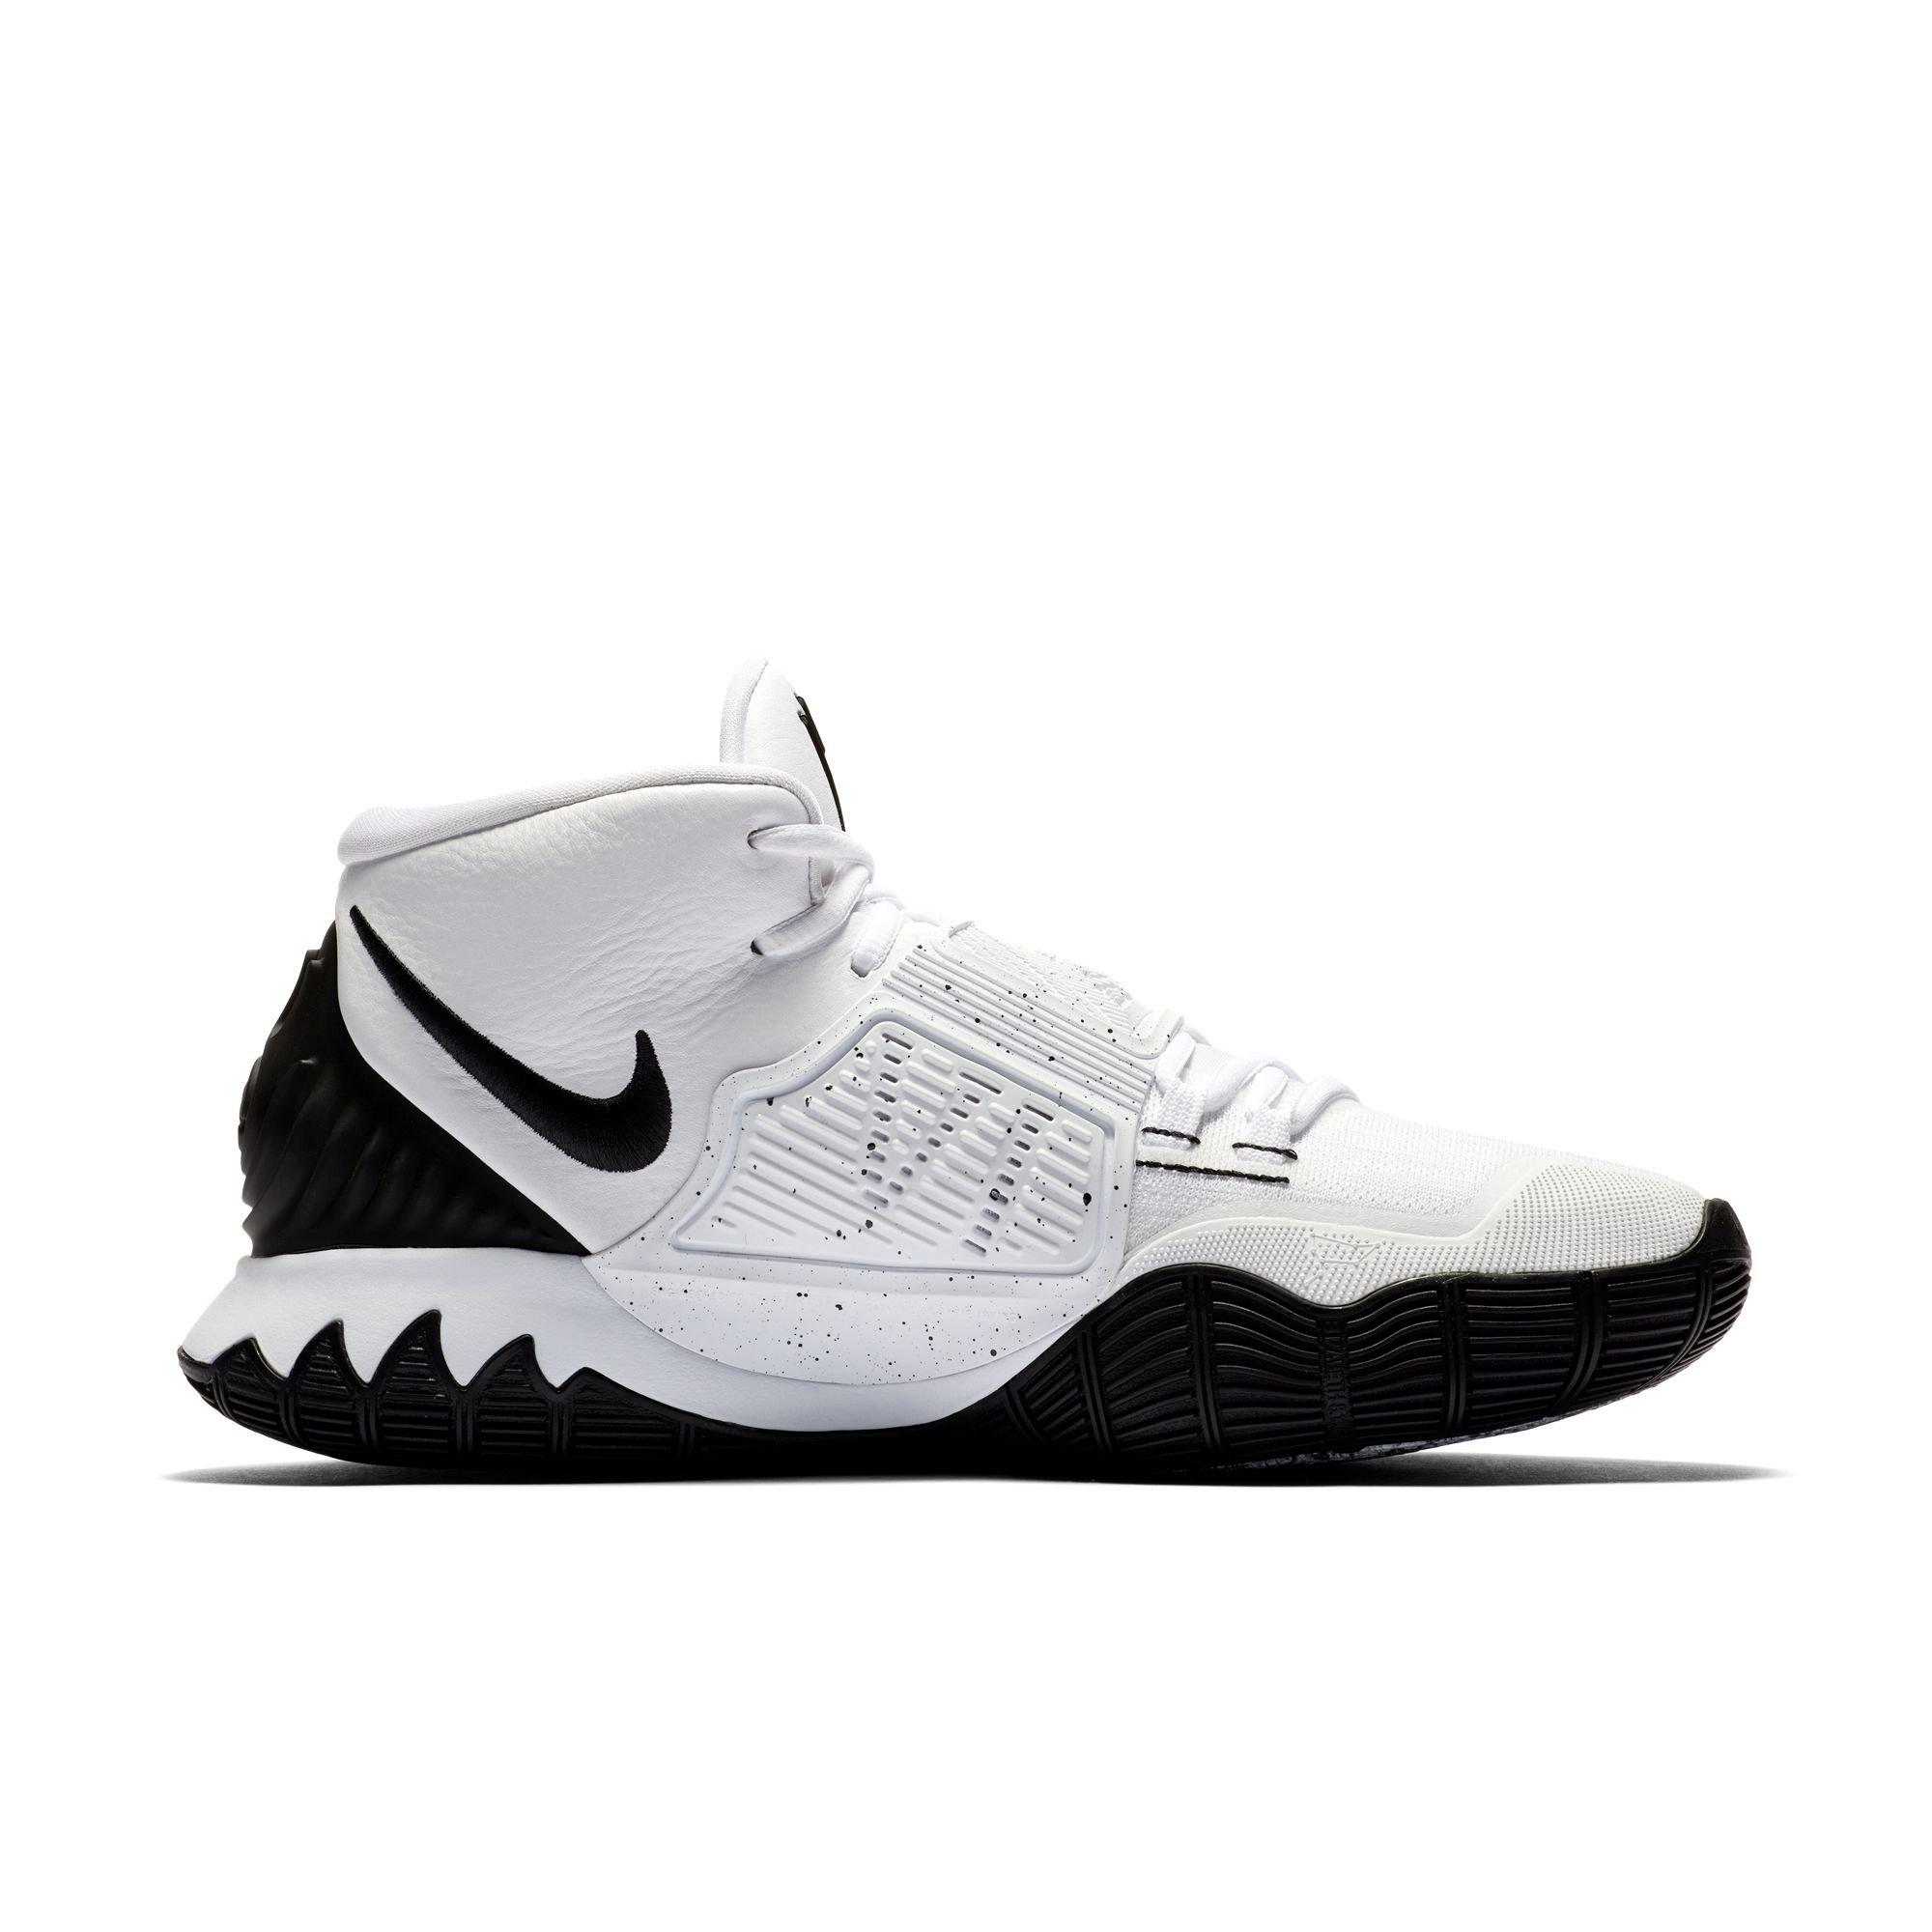 kyrie all white shoes